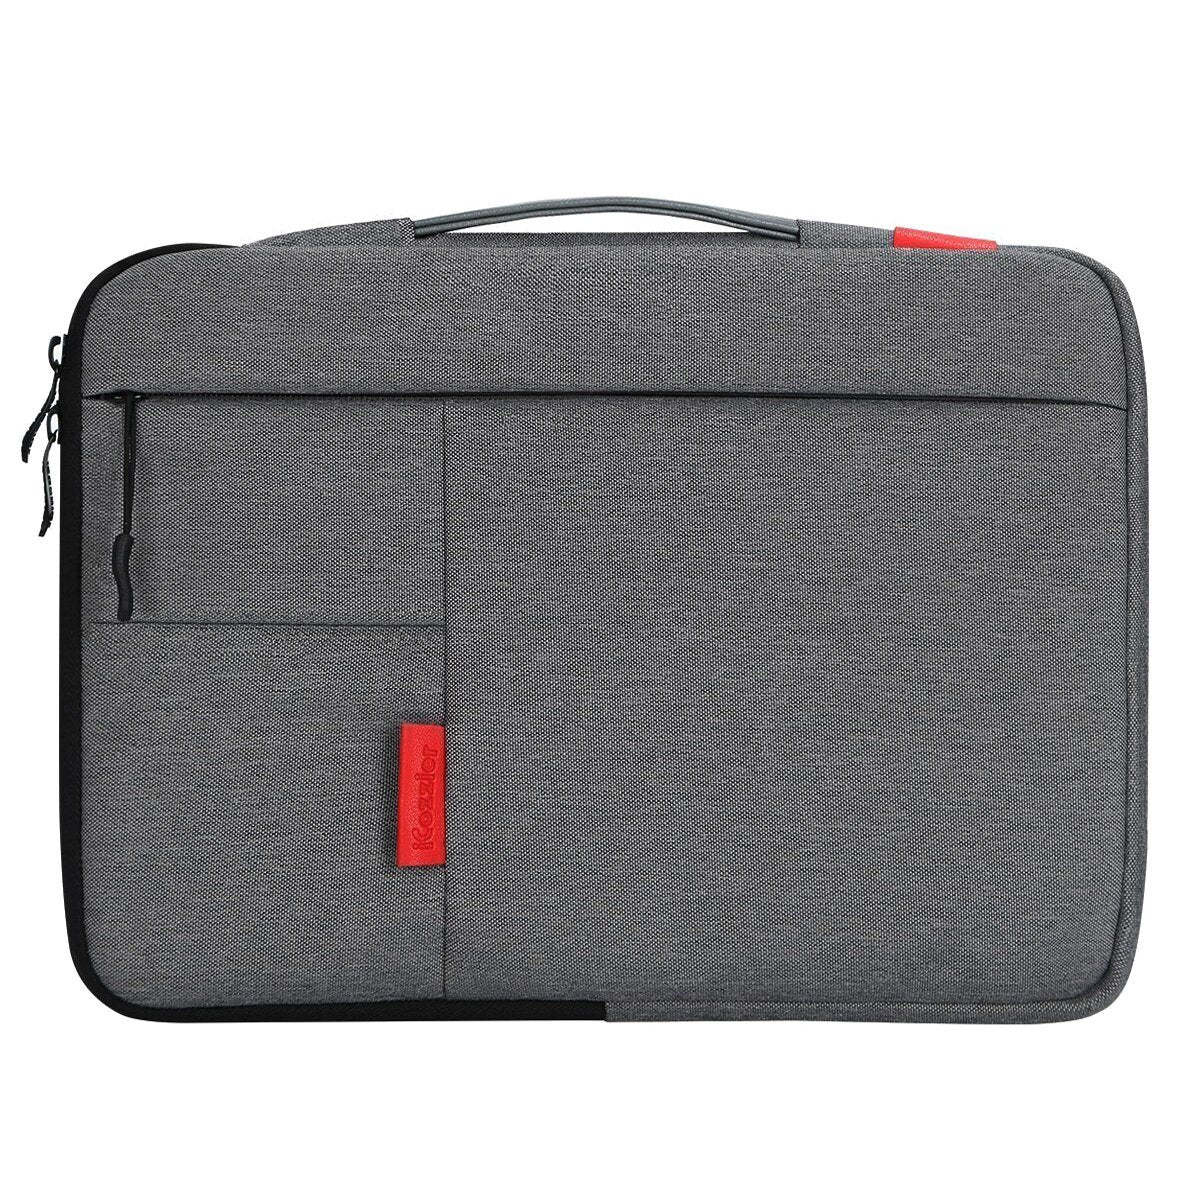 iCozzier 11.6 inch Water-Resistant Shockproof Sleeve Carrying Bag Laptop for 11.6  Macbook Pro / dell  Laptop Sleeve Case  Bag (11-11.6) GreatEagleInc